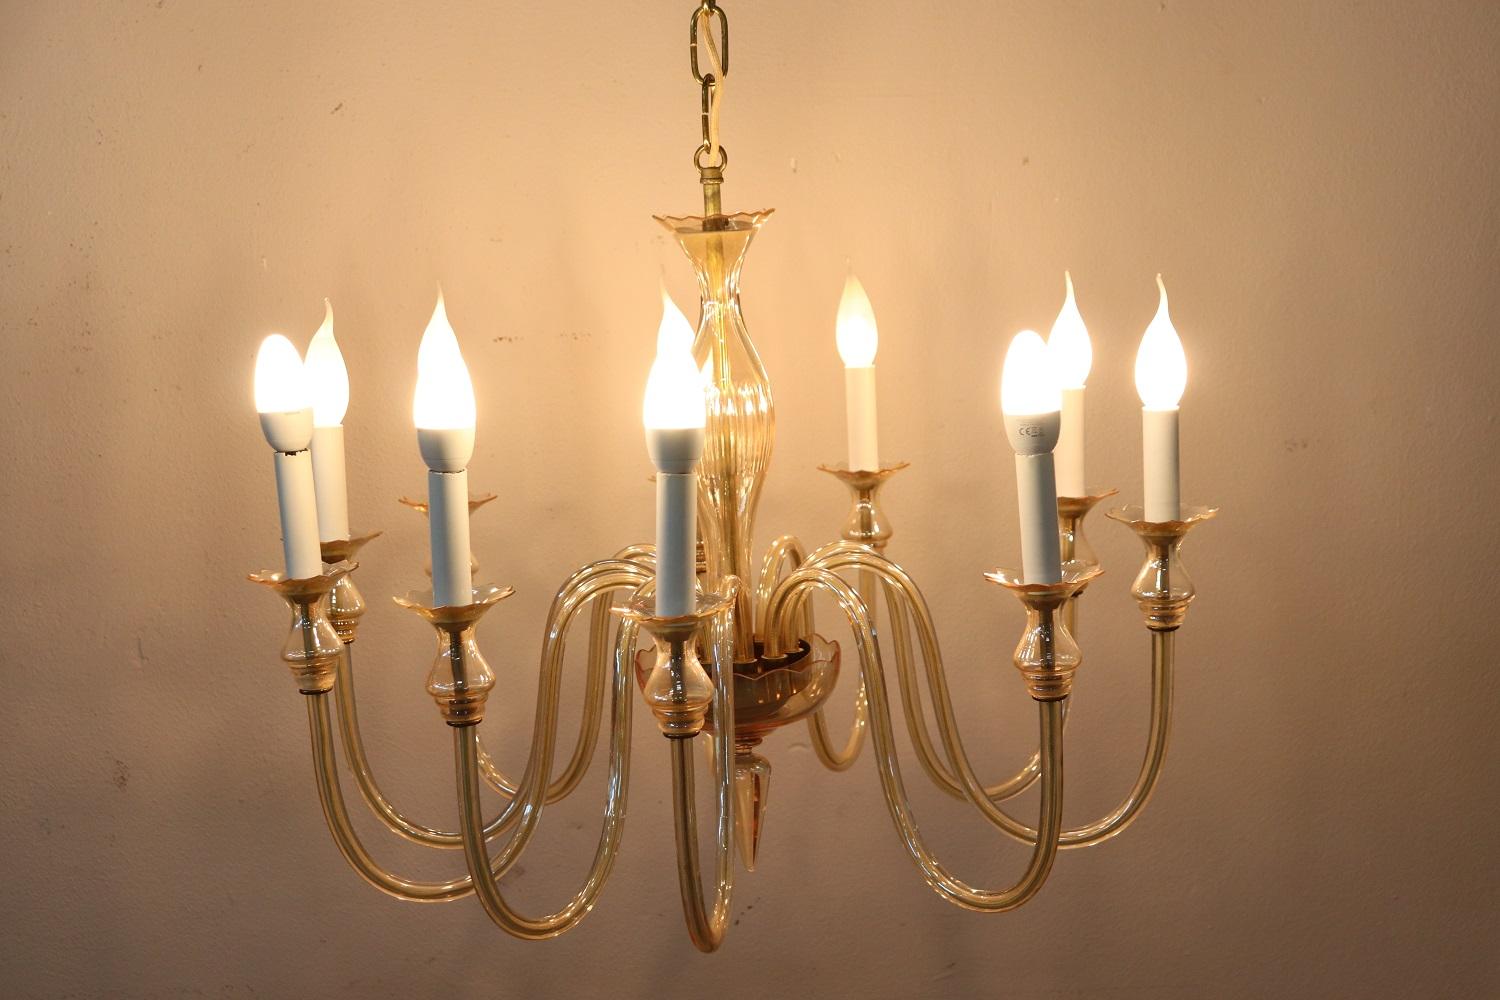 Beautiful and refined artistic glass chandelier of Murano 20th century, 1980s total ten lights. The chandelier is made with the classic artistic work of Murano glass in delicate and rare transparent yellow glass. Fully functional. The total height